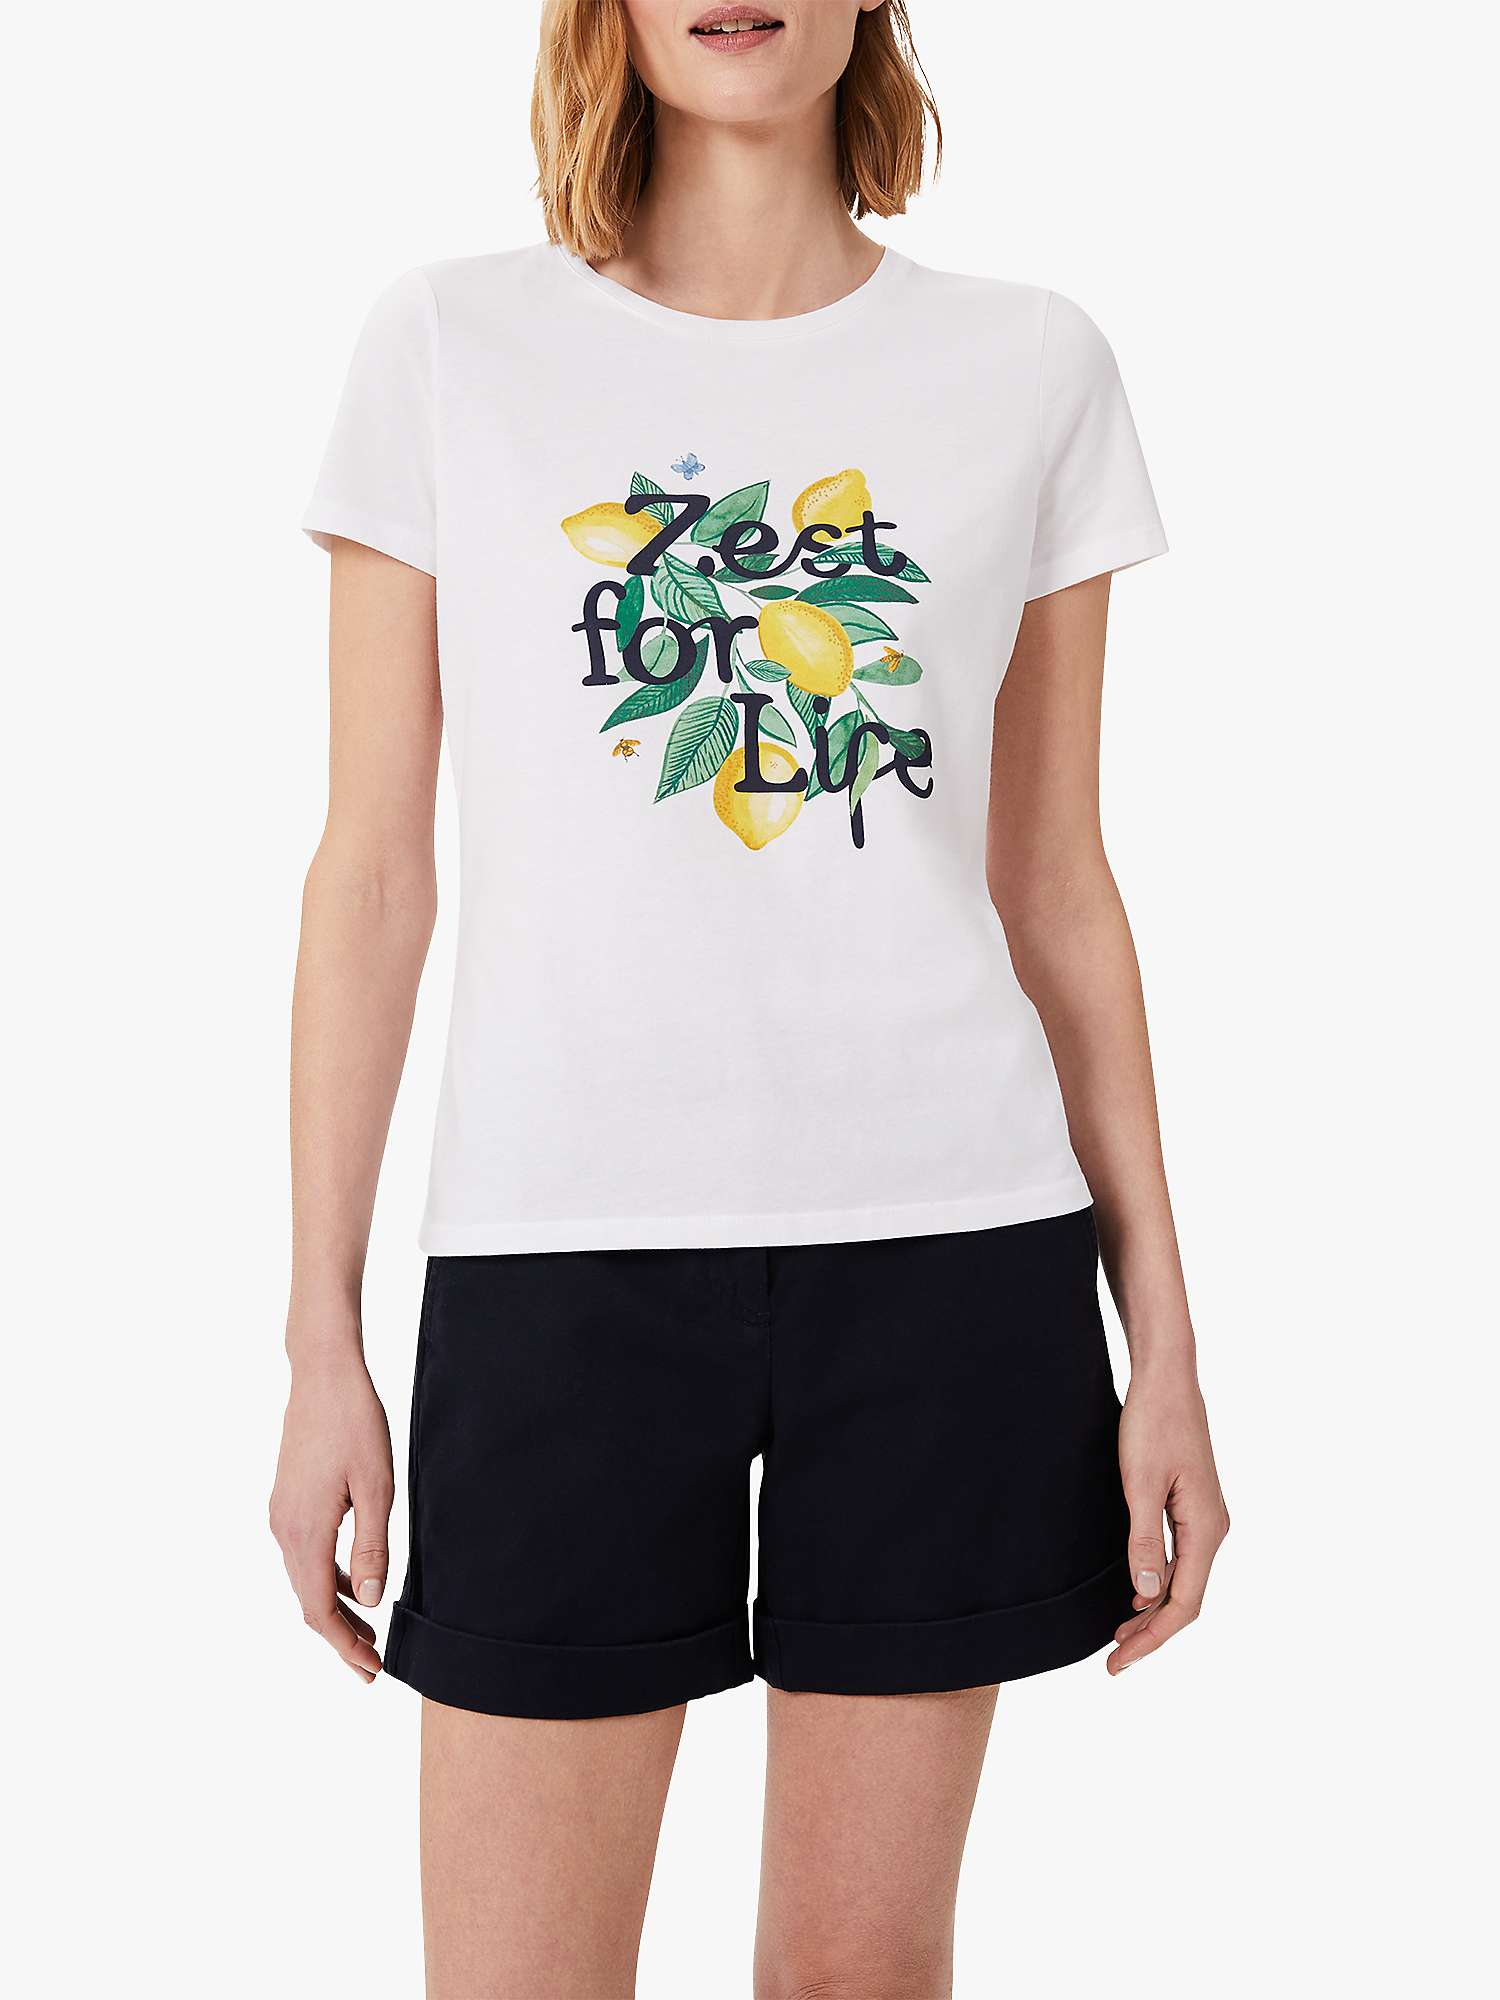 Buy Hobbs Pixie Zest For Life T-Shirt, White/Yellow Online at johnlewis.com